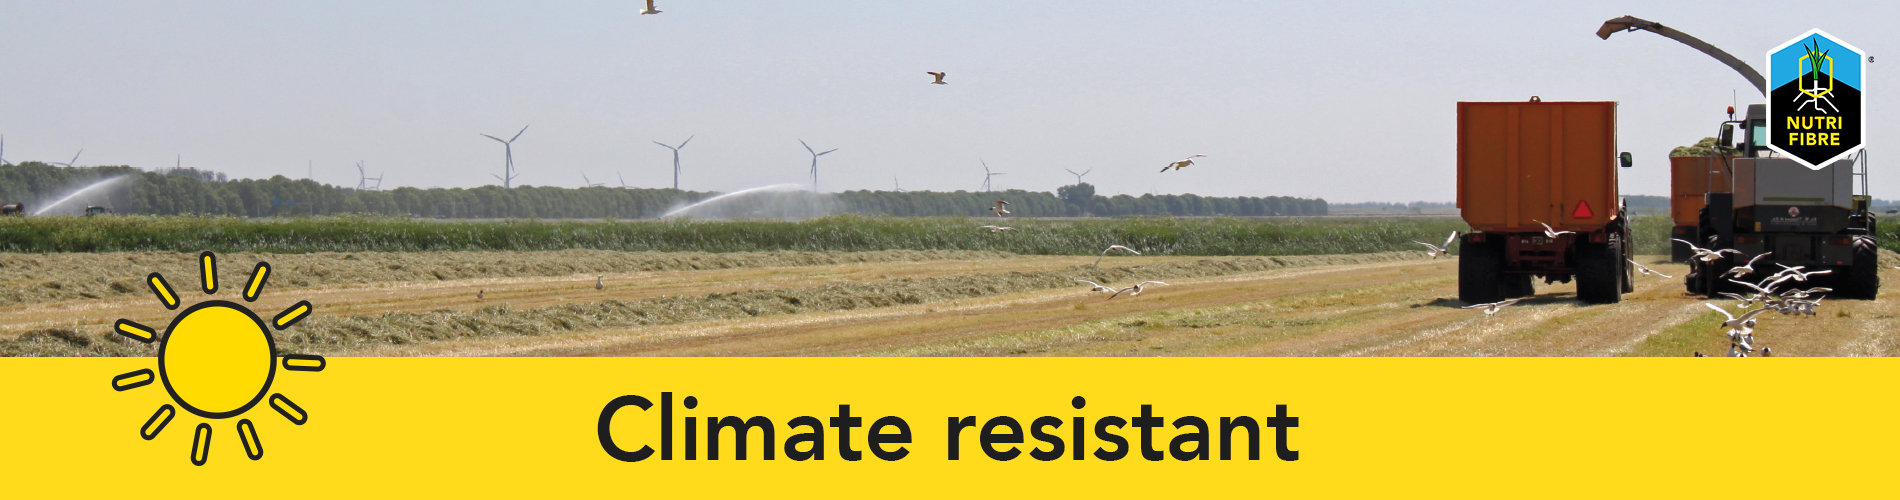 NF_banner_climate_resistant_eng!
						